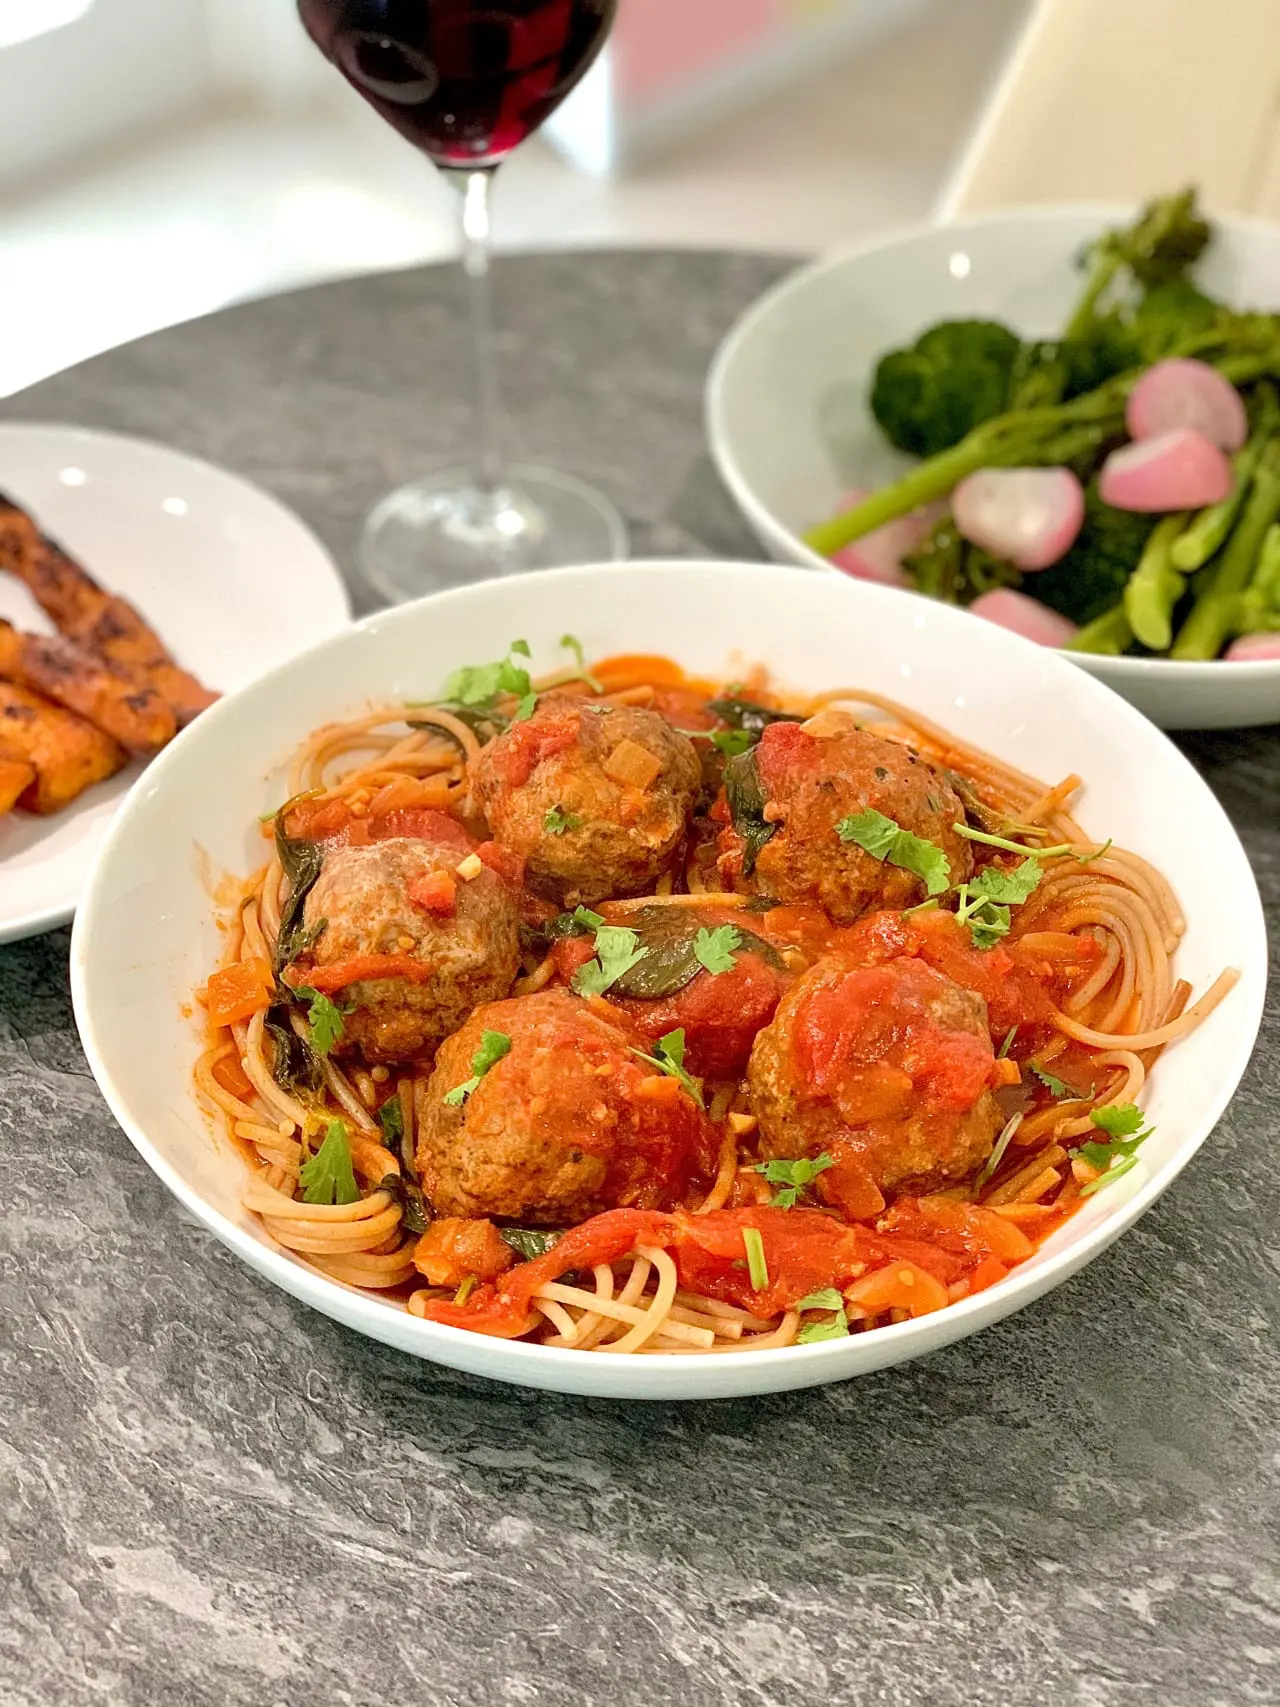 The-Foodie-Footballer-Spaghetti-and-Meatballs-in-a-Spicy-Tomato-and-Basil-Sauce